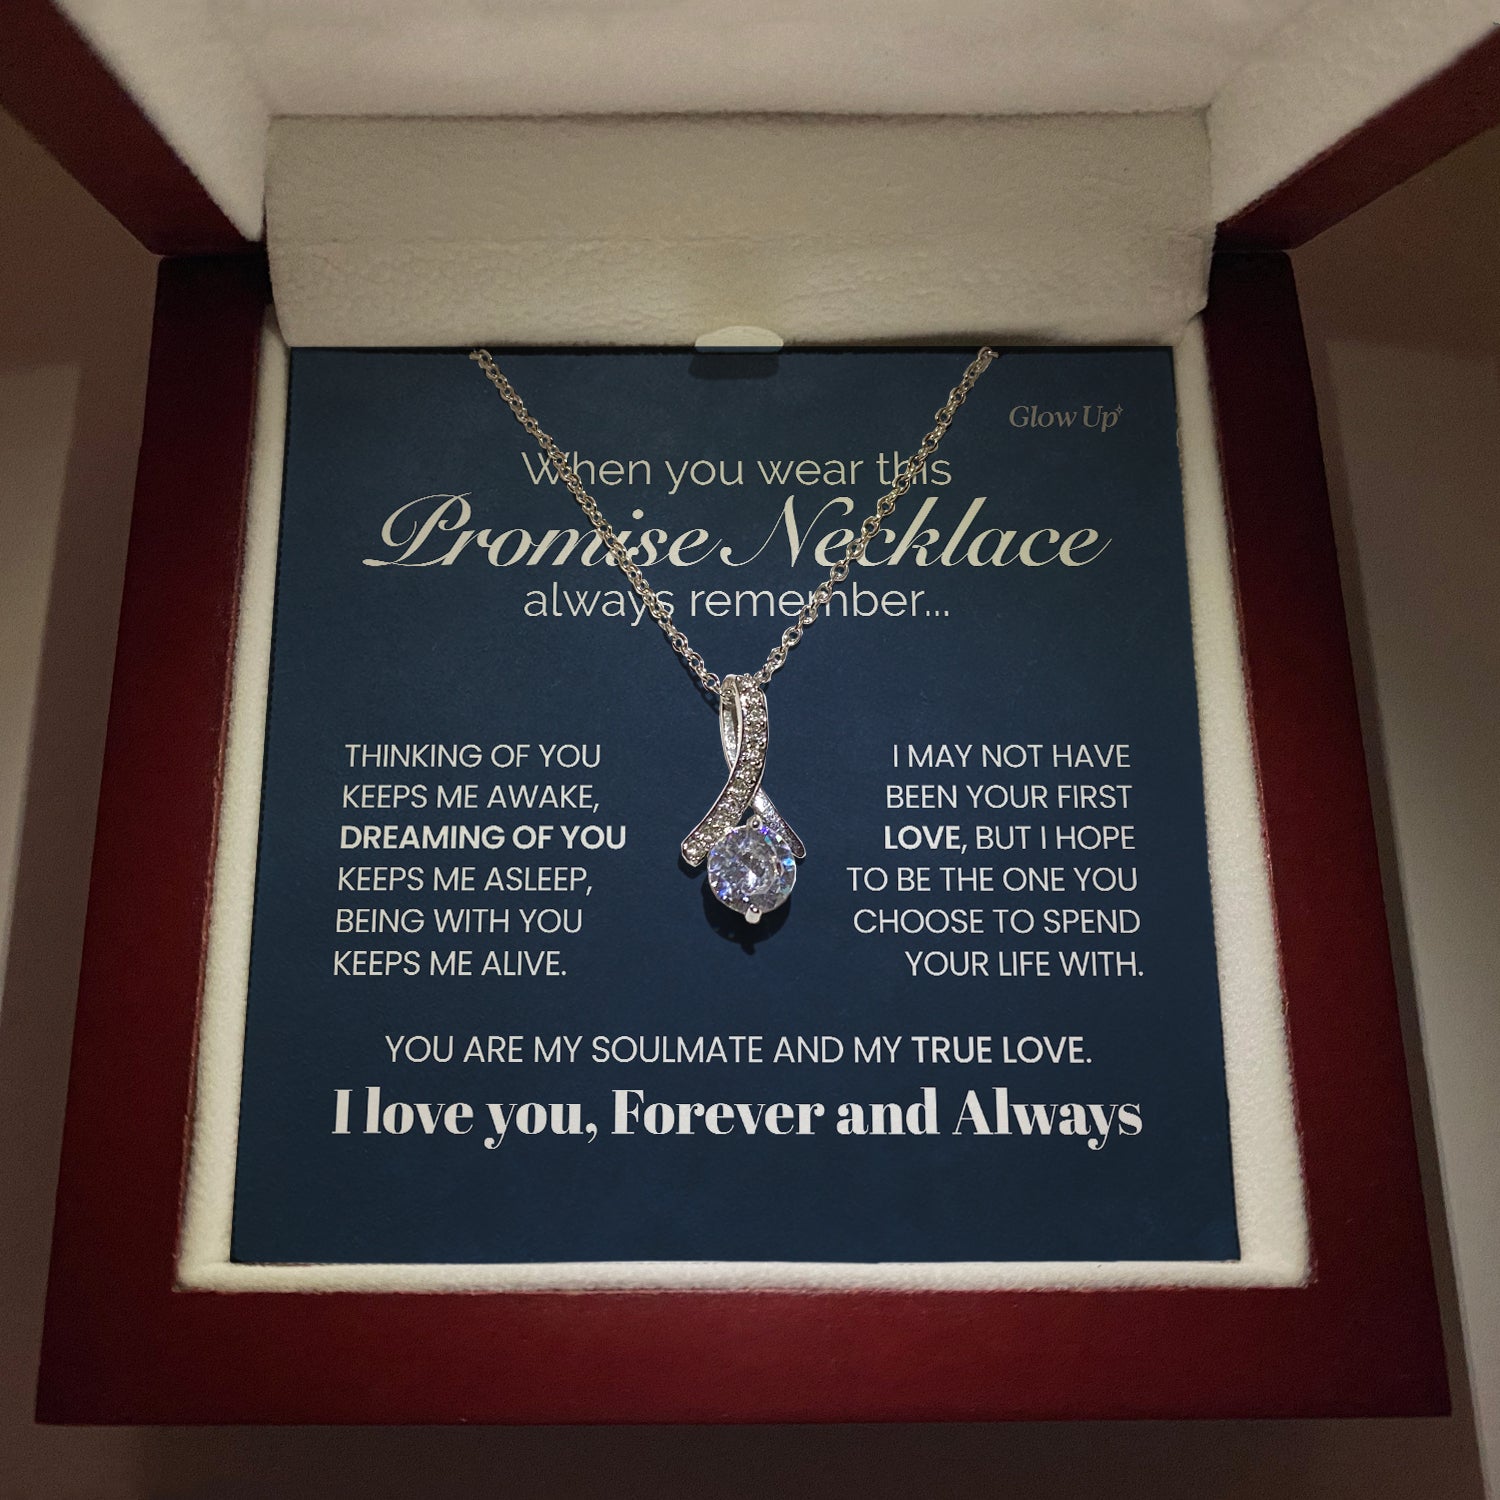 ShineOn Fulfillment Jewelry 14K White Gold Finish / Luxury LED Box Promise Necklace - When You Wear This Always Remember